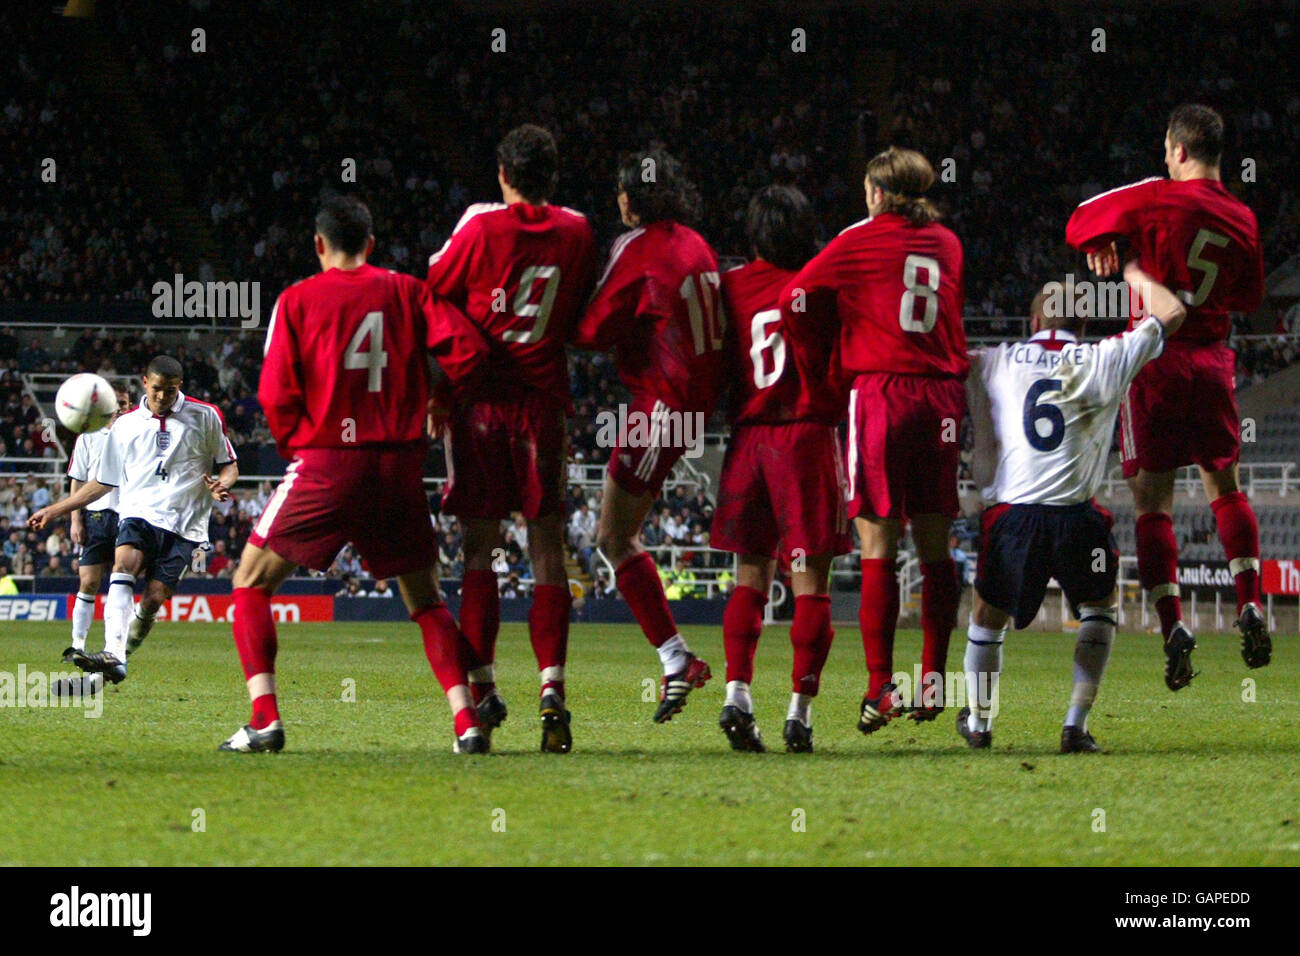 Soccer - European Under 21 Championships 2004 Qualifier - Group Seven - England v Turkey. England's Jermaine Jenas (l) attempts to curl his free kick around the Turkish wall Stock Photo